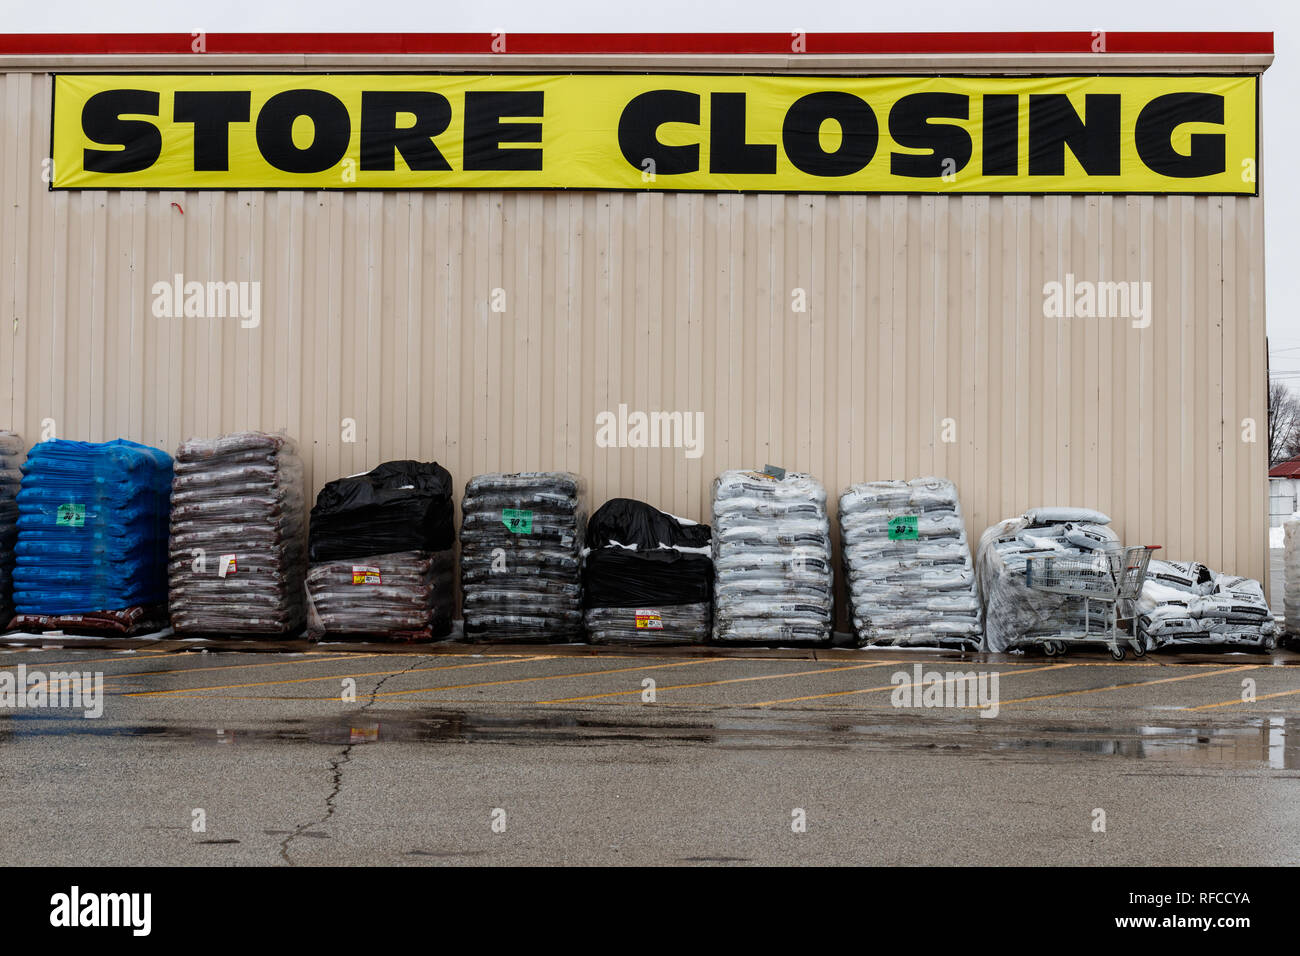 Peru - Circa January 2019: Store Closing signs at a Kmart Retail Location. Sears Holdings filed for bankruptcy V Stock Photo